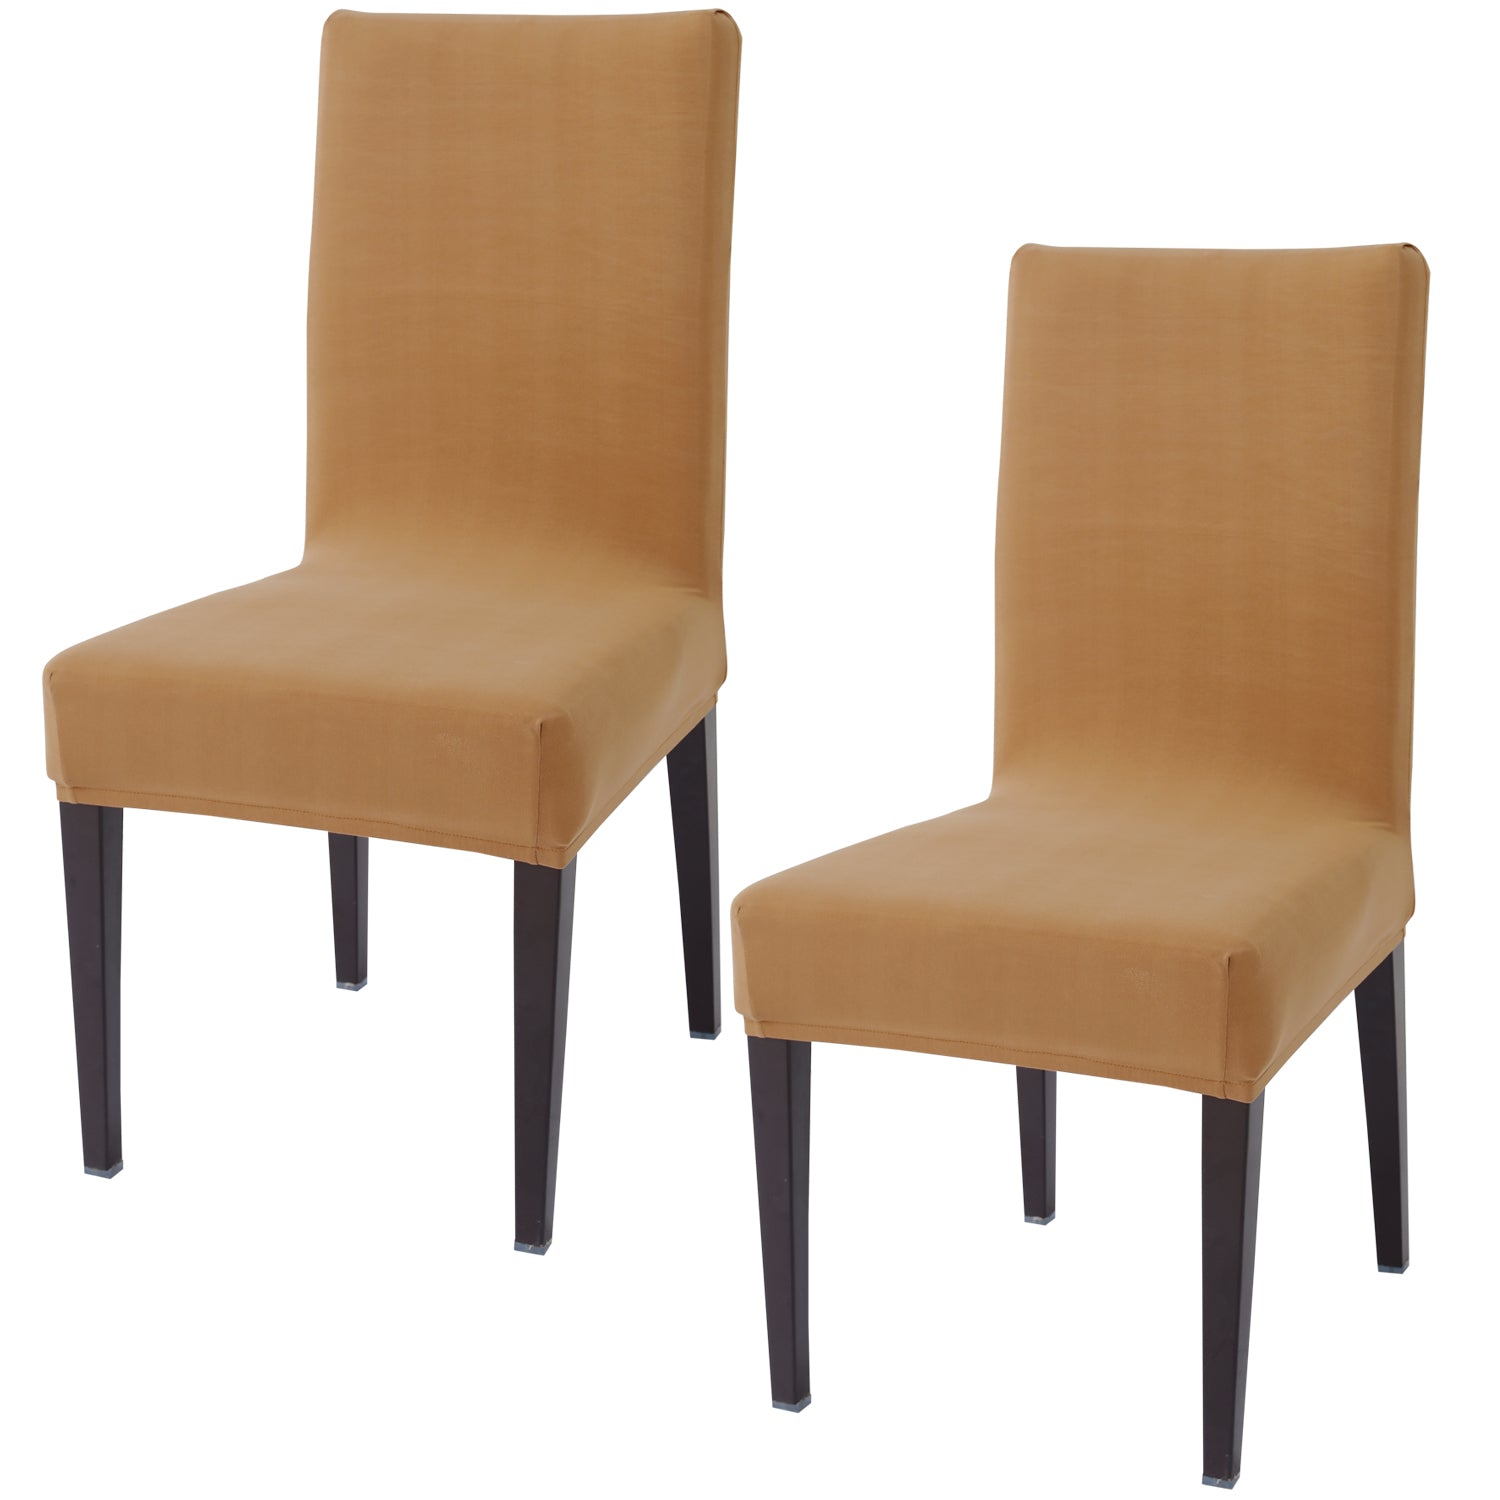 Elastic Stretchable Dining Chair Cover, Sand Brown